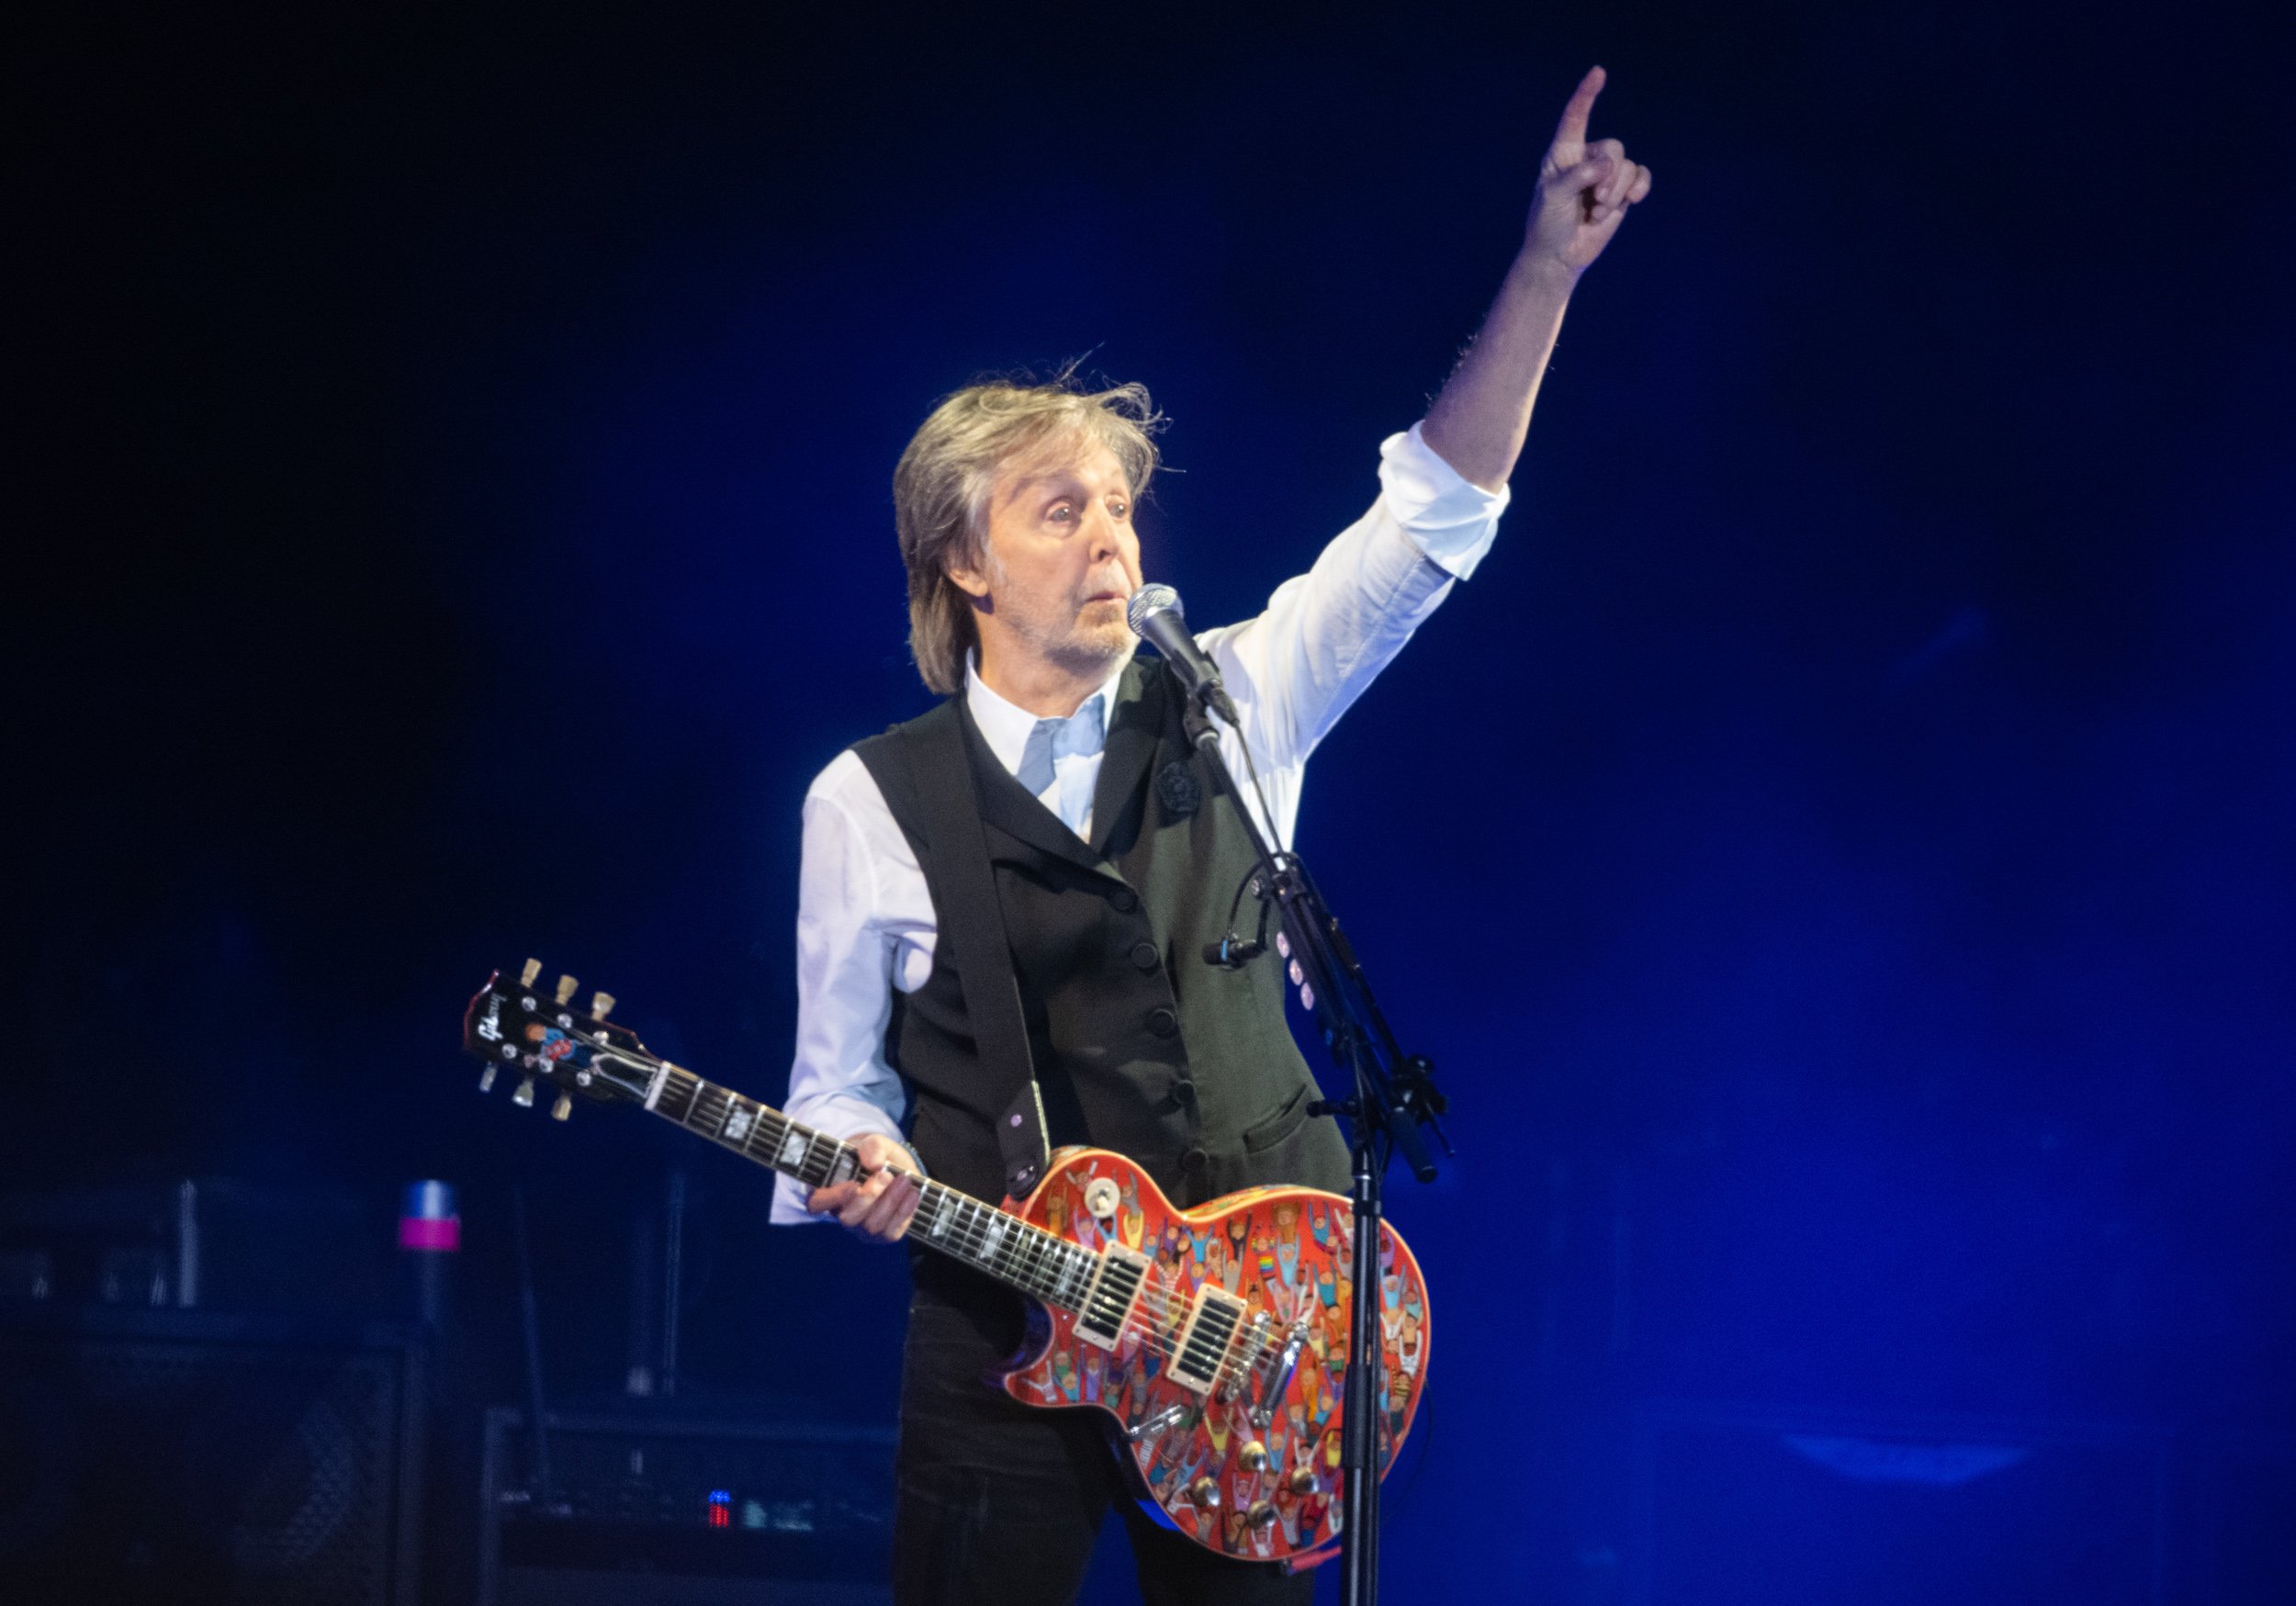 Paul McCartney performs at day four of the Glastonbury Festival in England